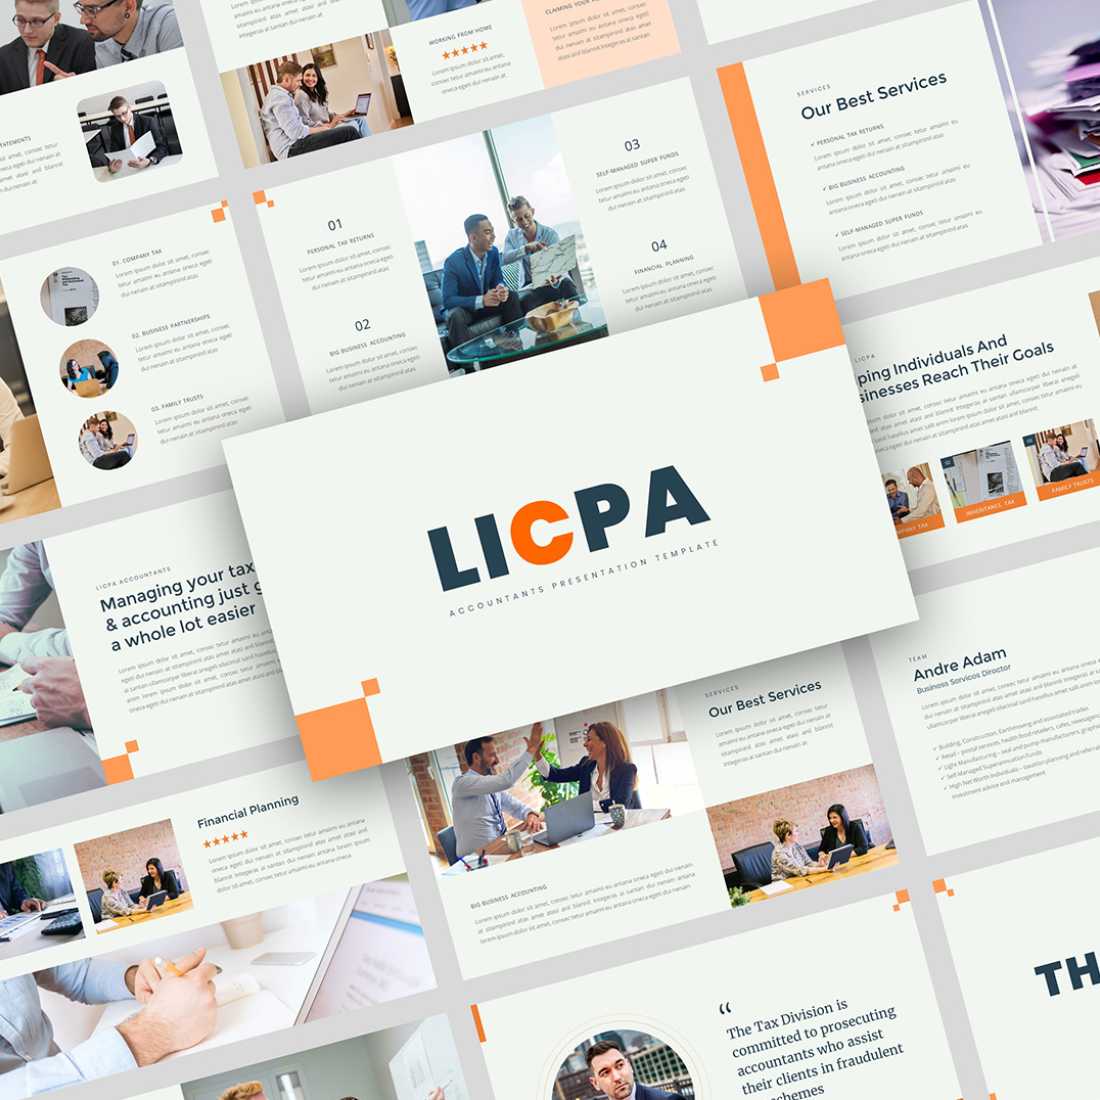 Licpa - Accountants Presentation PowerPoint Template preview image.